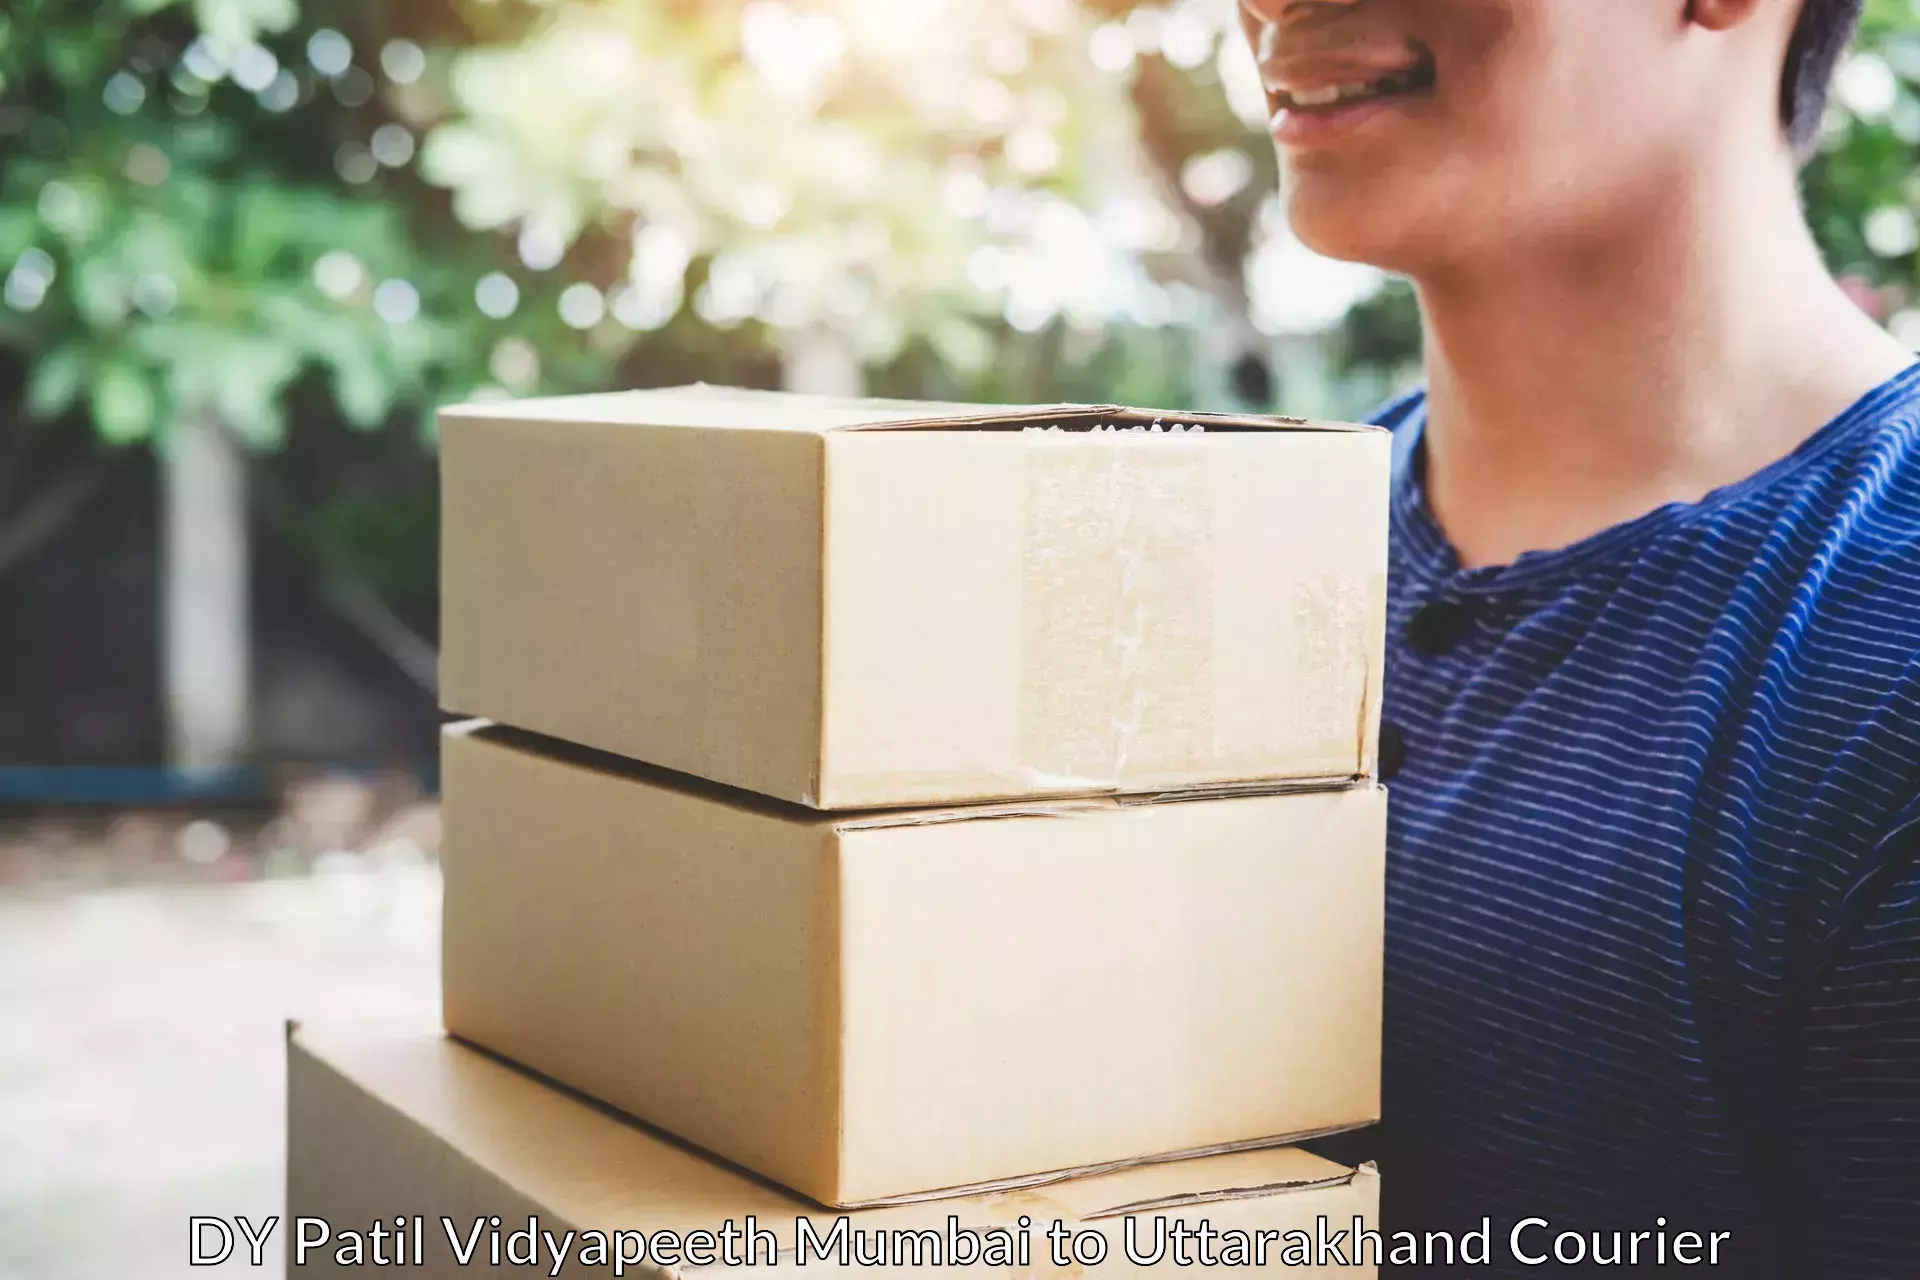 High-quality moving services DY Patil Vidyapeeth Mumbai to IIT Roorkee